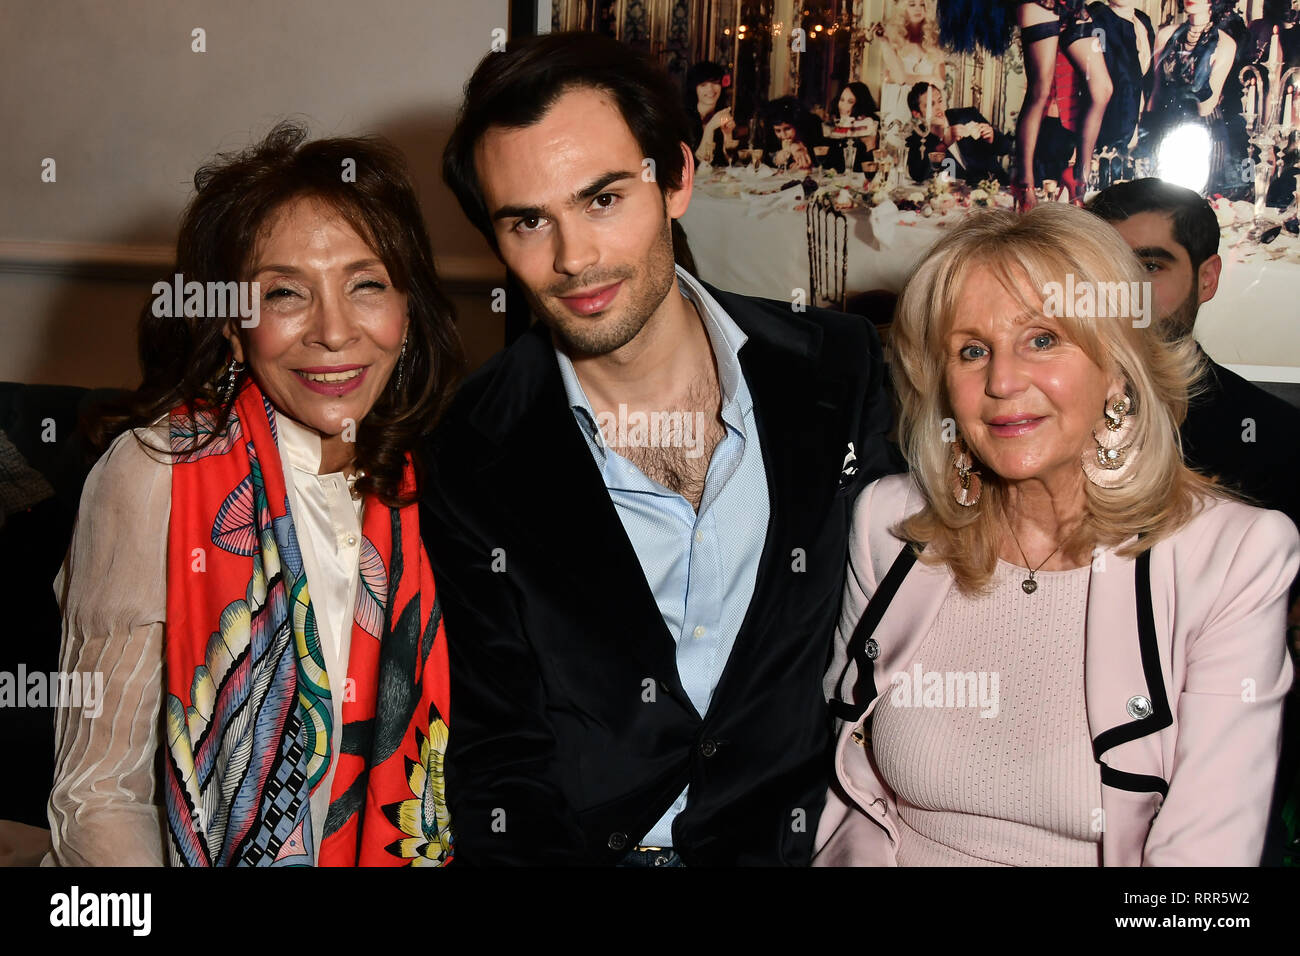 London, UK. 26th Feb 2019. Mark-Francis Vandelli and Liz Brewer attend Nina Naustdal catwalk show SS19/20 collection by The London School of Beauty & Make-up at Bagatelle on 26 Feb 2019, London, UK. Credit: Picture Capital/Alamy Live News Stock Photo